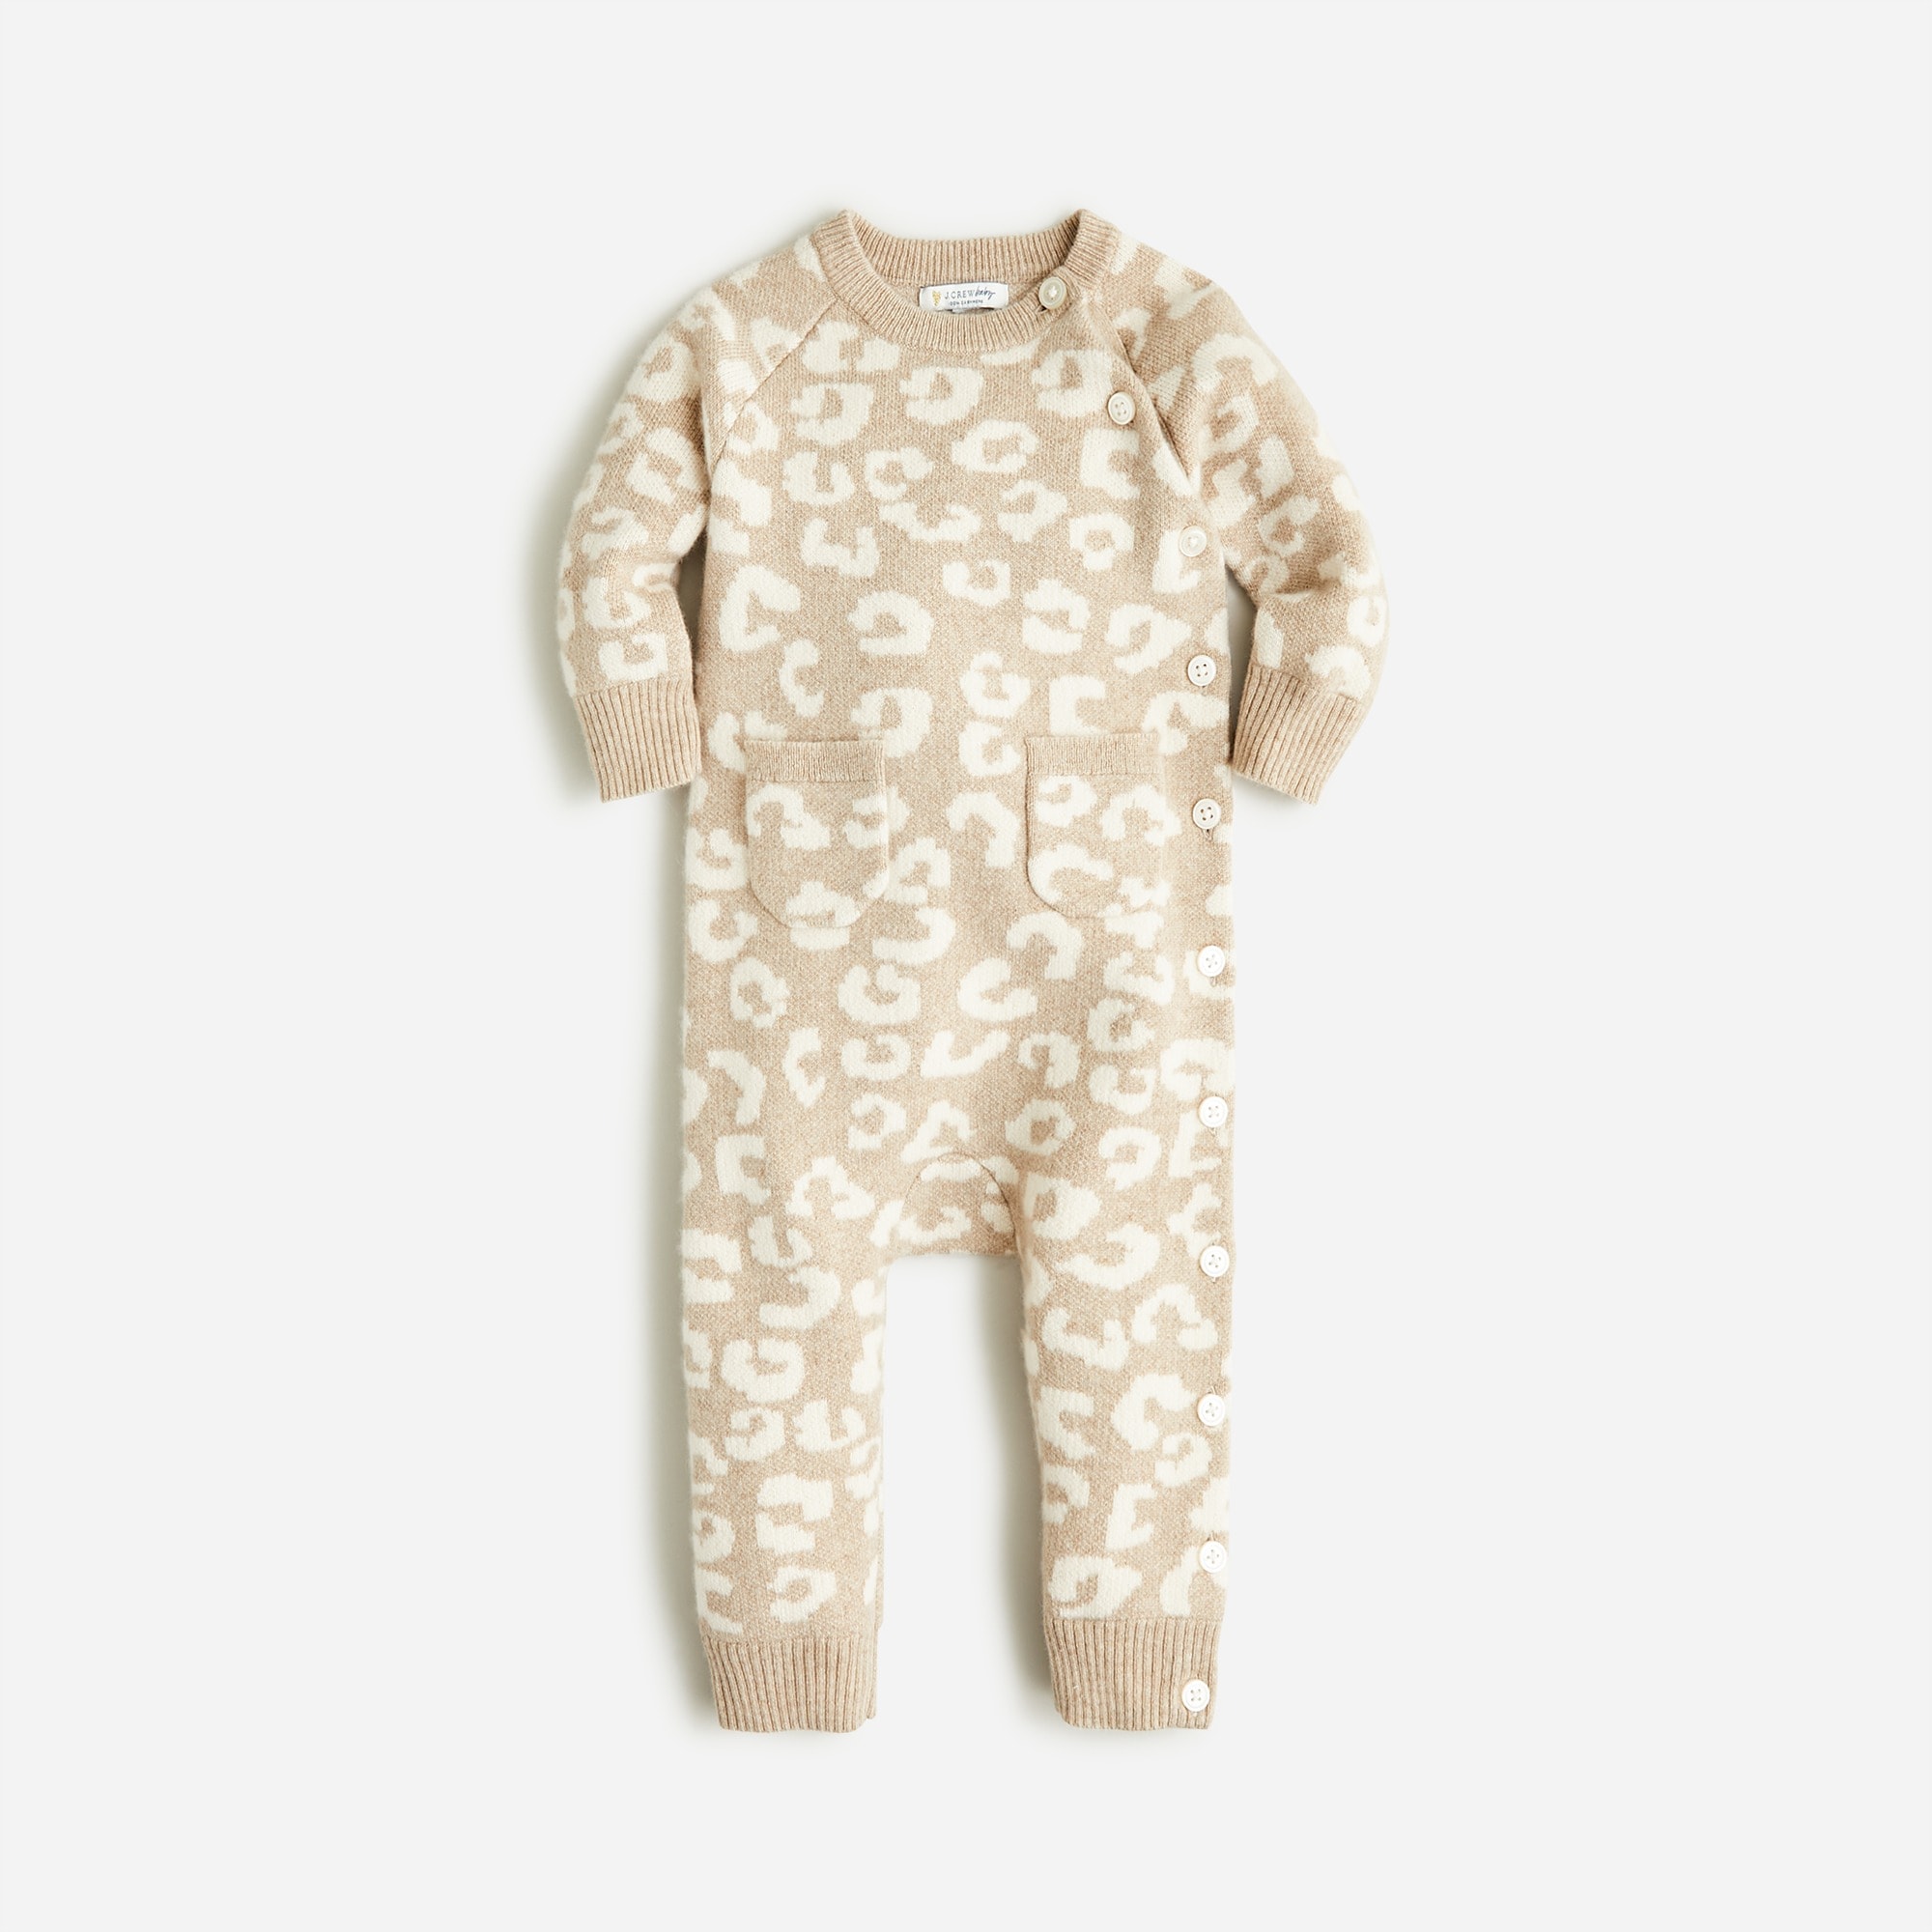  Limited-edition baby cashmere one-piece in leopard